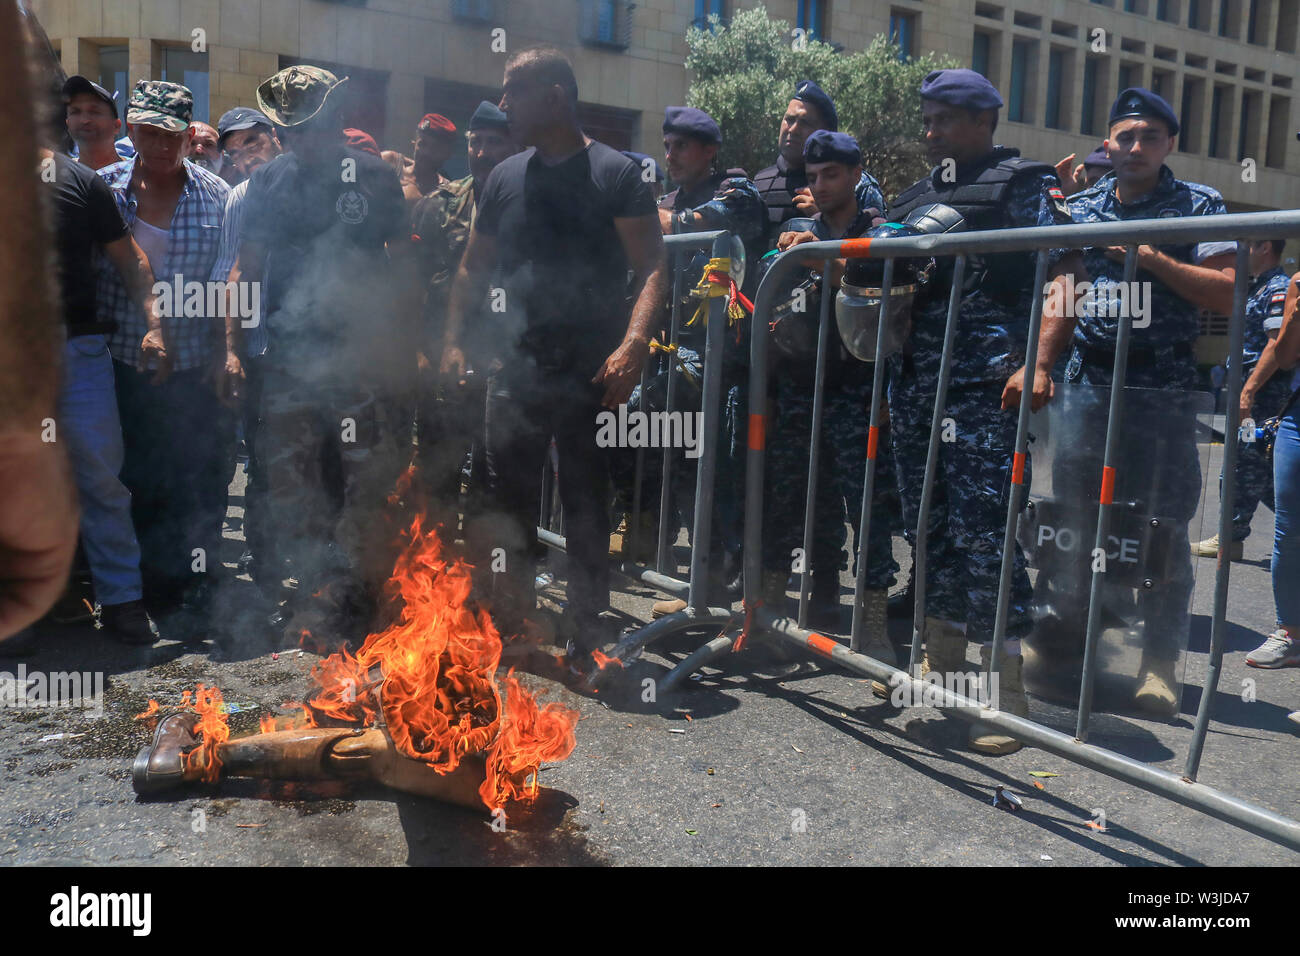 Beirut Lebanon. 16th July 2019. Retired soldiers of the Lebanese  army set fire to a veteran's prosthetic legs as they  protest against cuts in state pensions and over austerity budget measures being debated by in Parliament as  planned cuts have unleashed a wave of public discontent, which have  targeted pensions, wages, services and social benefits.Credit: amer ghazzal/Alamy Live News Stock Photo